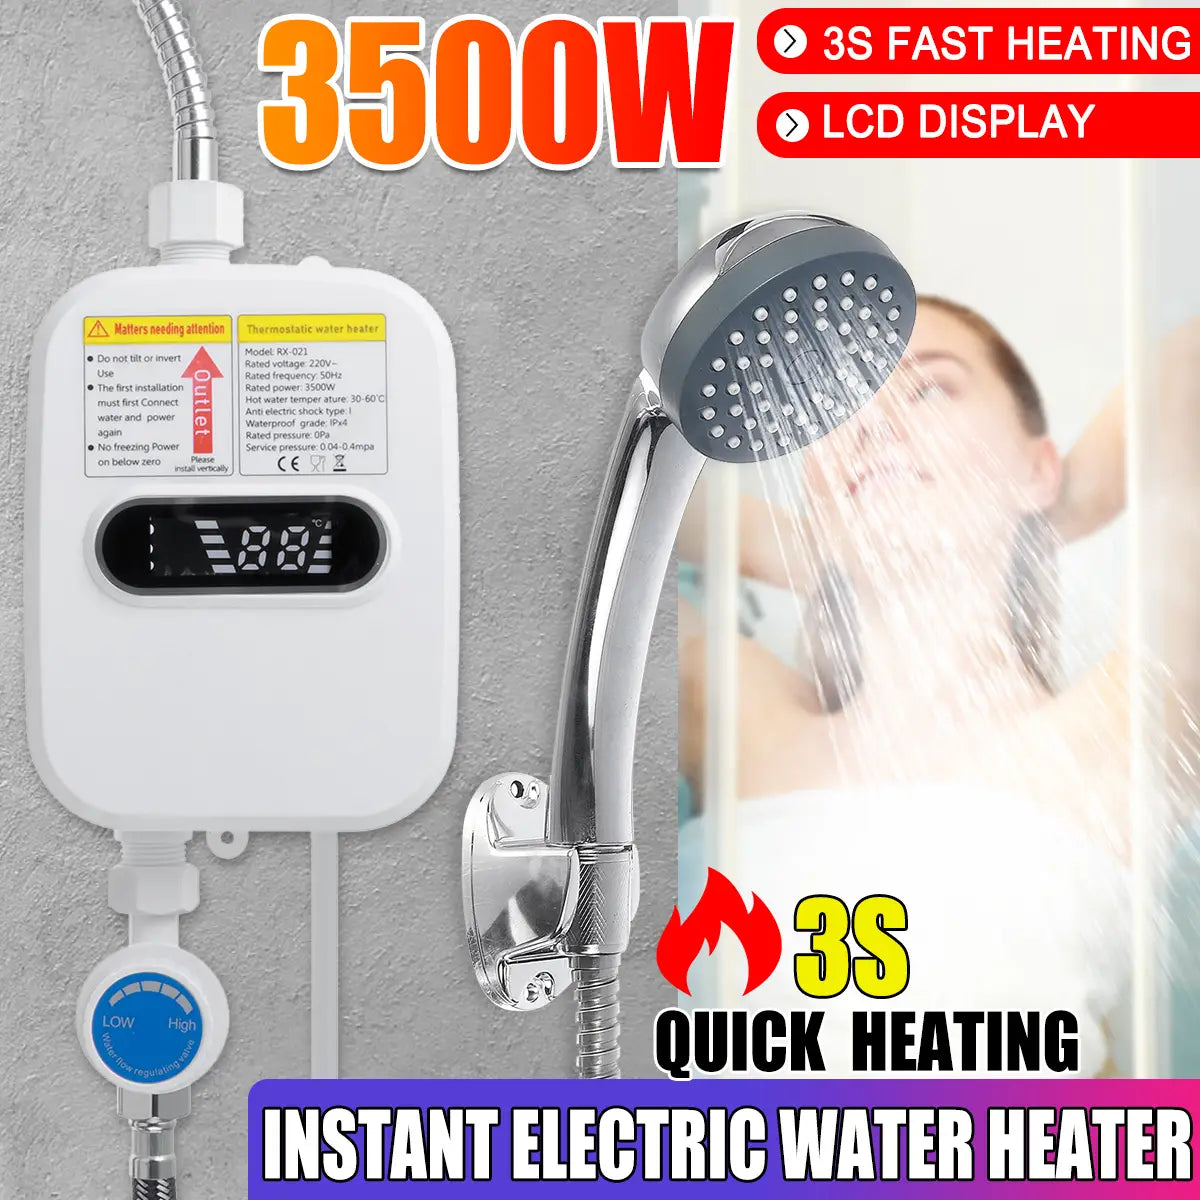 3500w 110v Instant Water Heater Shower 3s Heating Bathroom